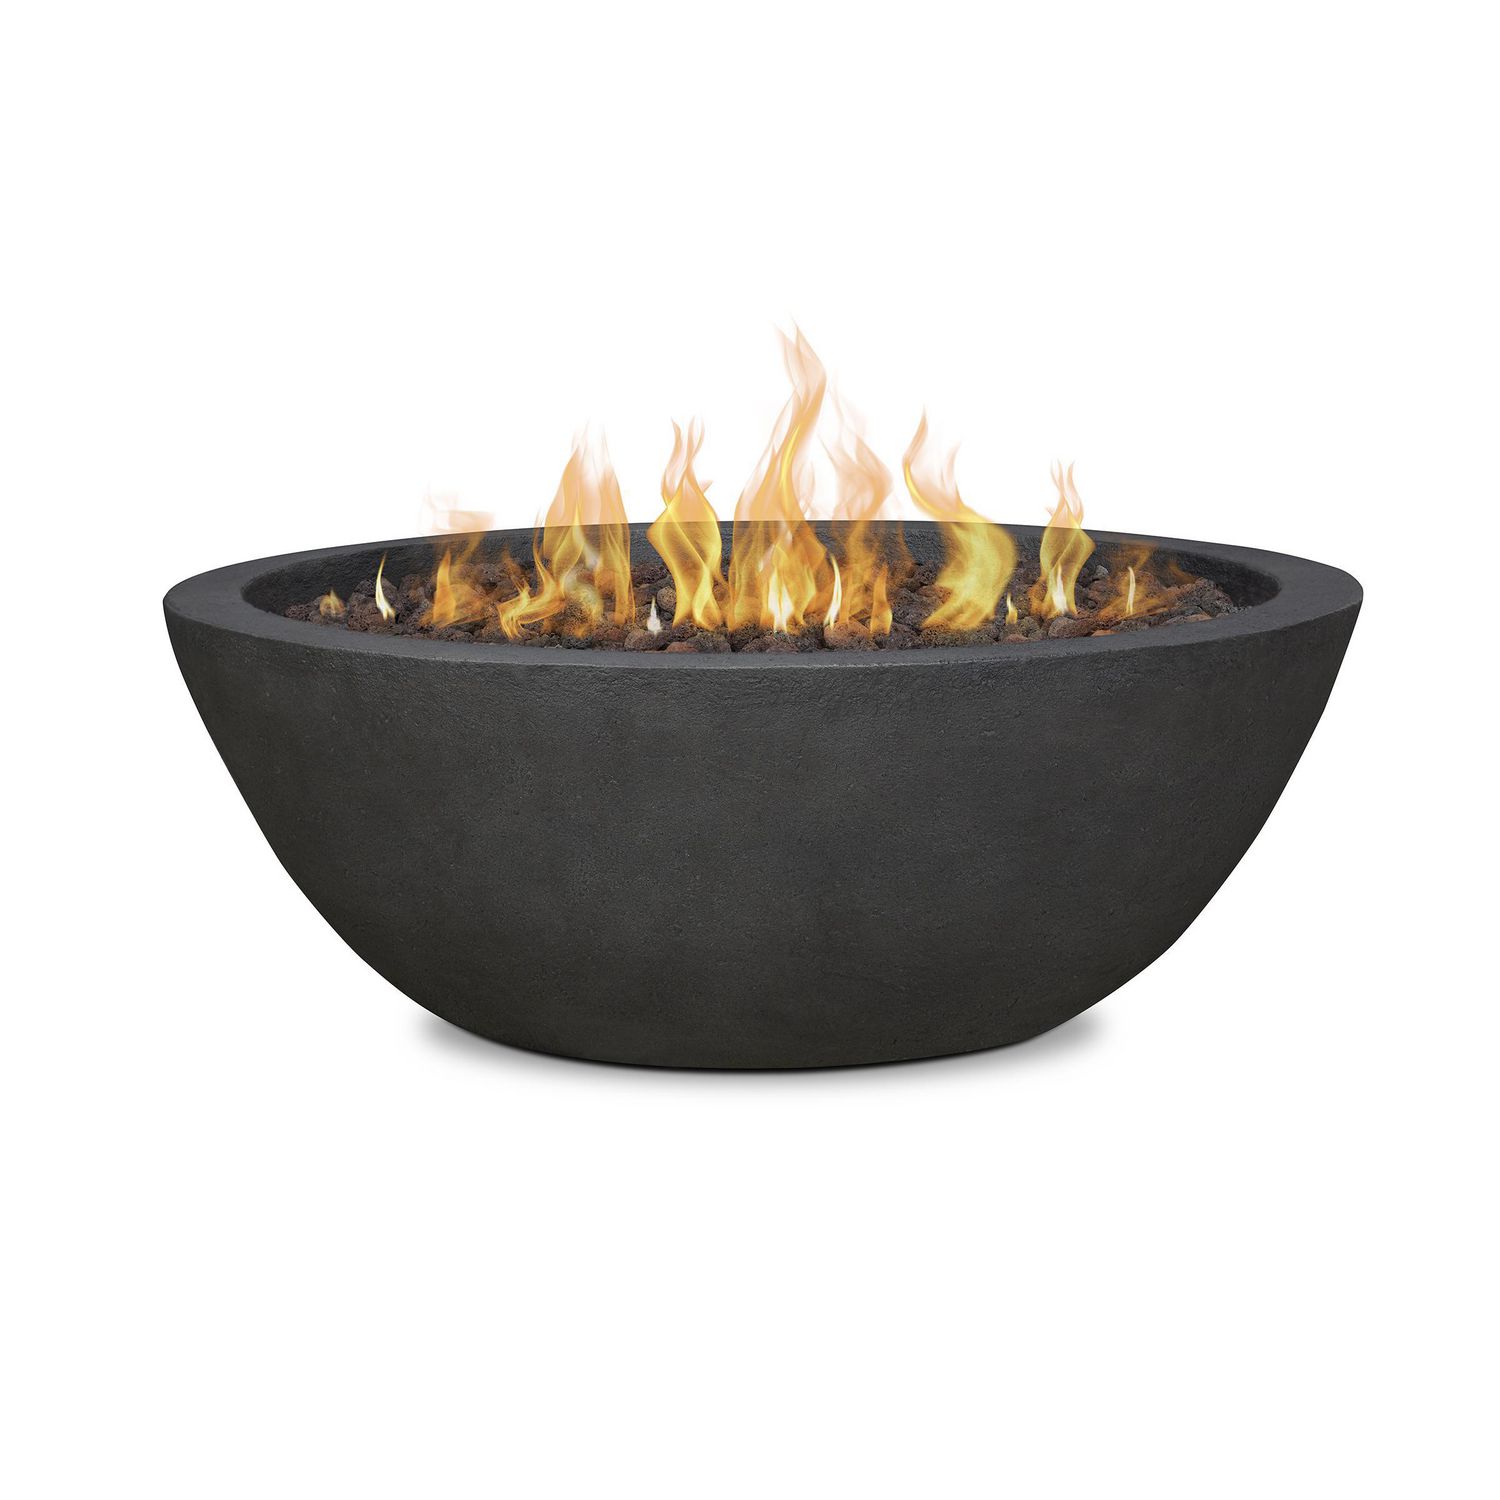 Riverside Propane Fire Bowl In Shale, How To Convert Propane To Natural Gas Fire Pit